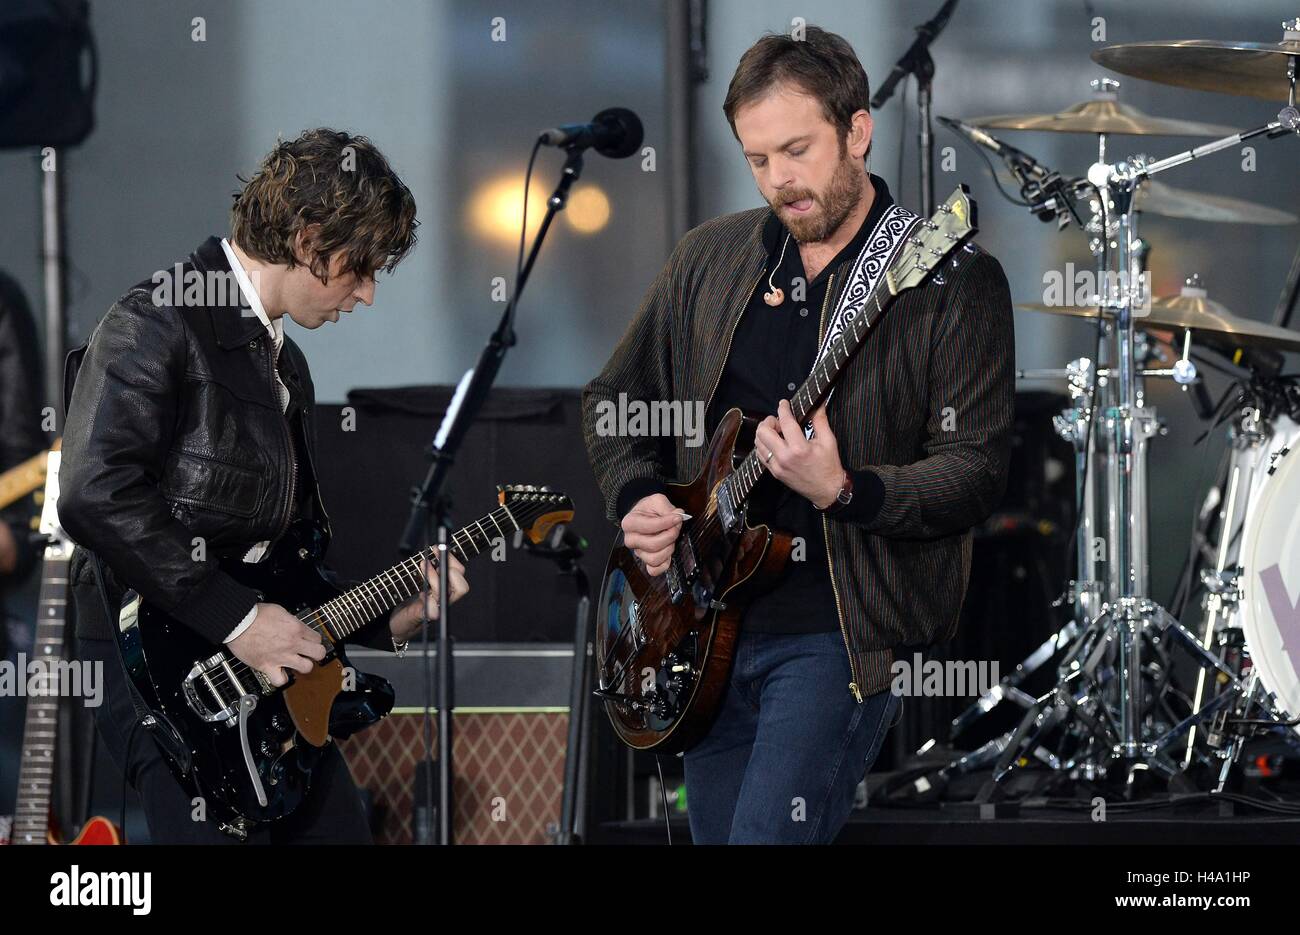 New York, NY, USA. 14th Oct, 2016. Matthew Followill, Caleb Followill, Kings of Leon on stage for NBC Today Show Concert with Kings of Leon, Rockefeller Plaza, New York, NY October 14, 2016. Credit:  Kristin Callahan/Everett Collection/Alamy Live News Stock Photo